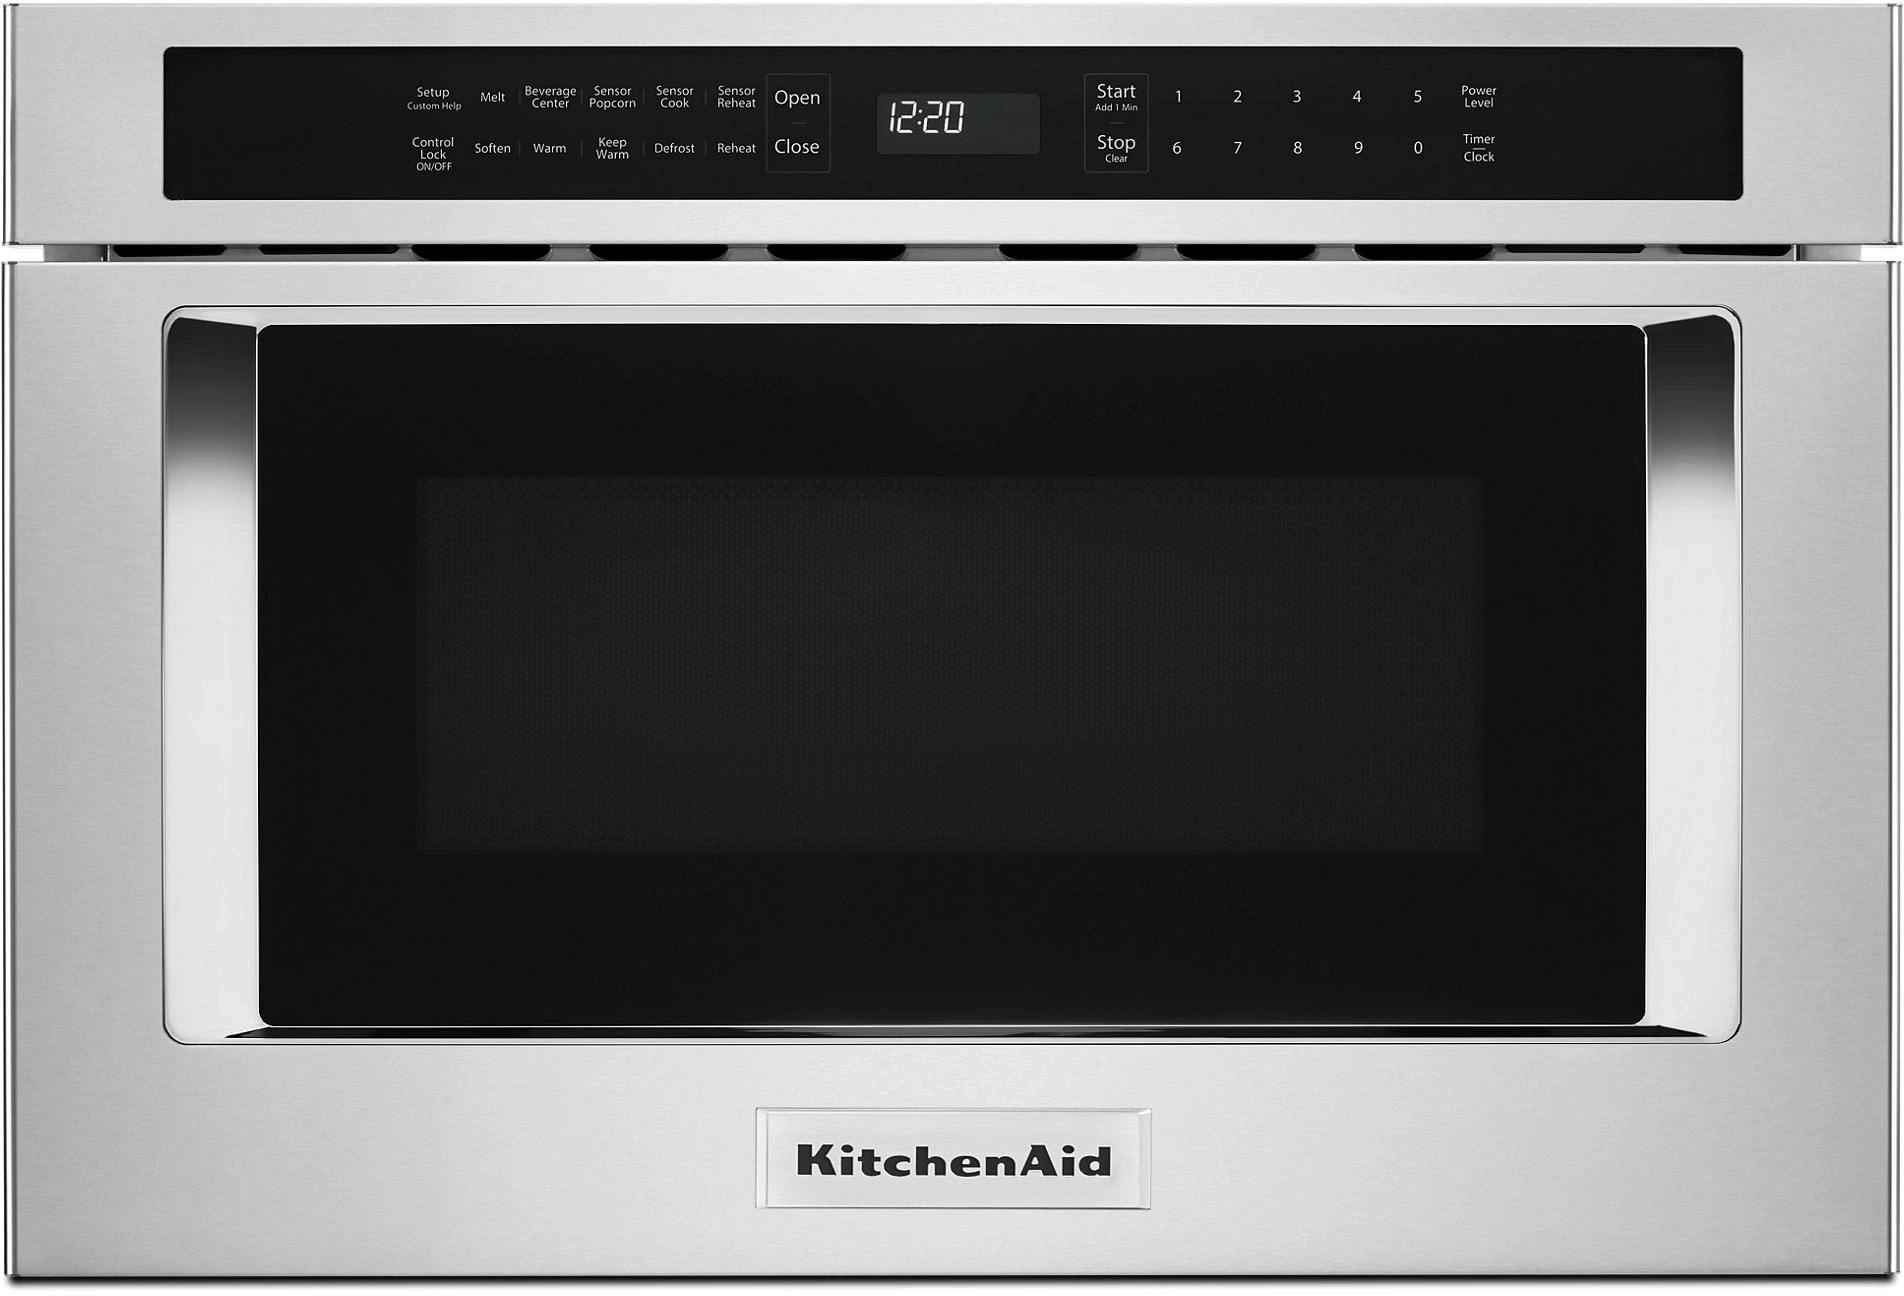 KitchenAid KMBD104GSS 24 Inch Undercounter Microwave Oven Drawer with Timed Defrost